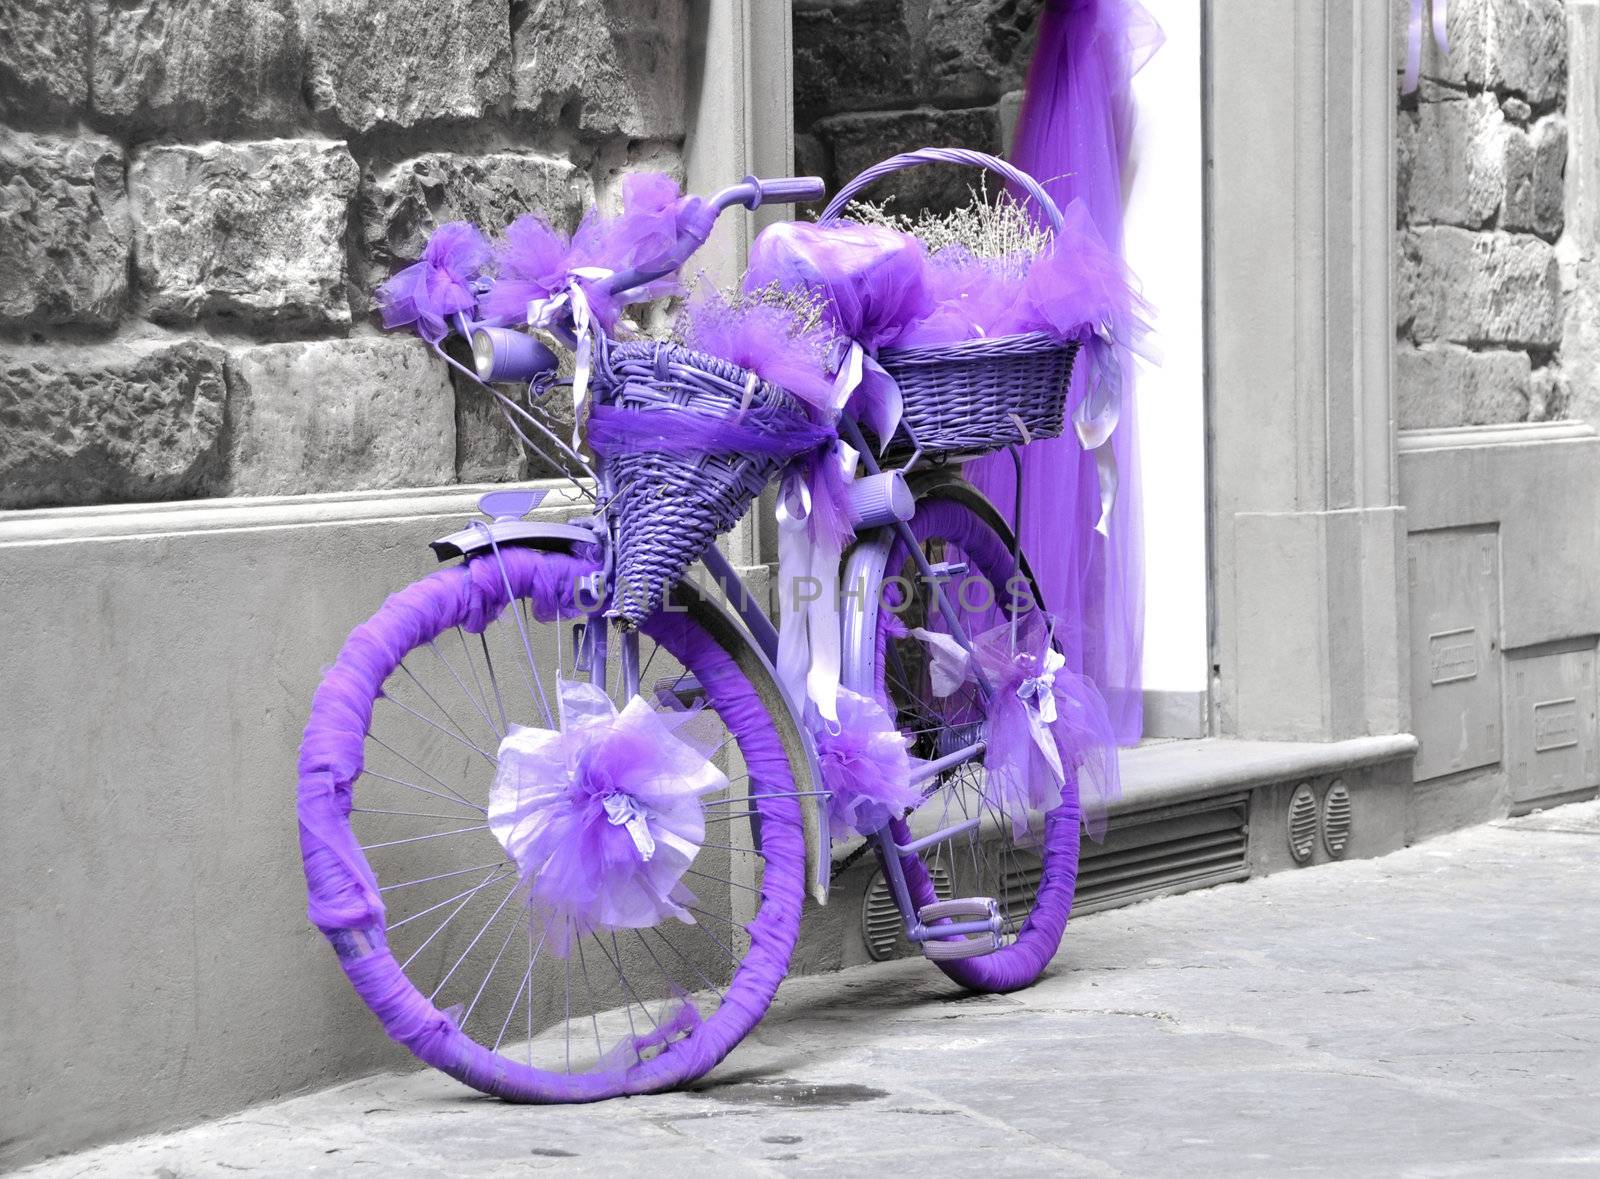 A bicycle wrapped in purple fabric by dutourdumonde